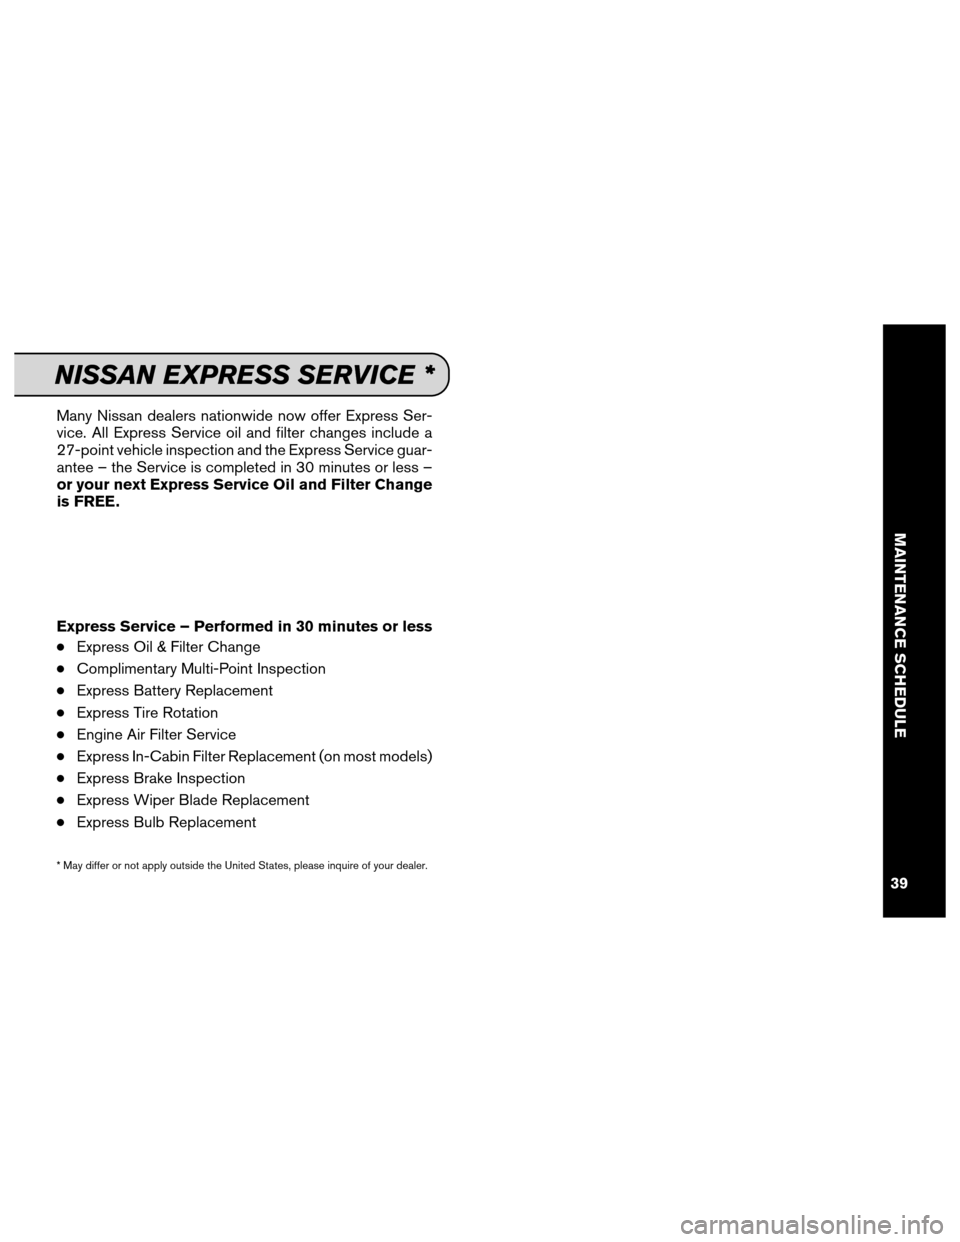 NISSAN XTERRA 2013 N50 / 2.G Service And Maintenance Guide Many Nissan dealers nationwide now offer Express Ser-
vice. All Express Service oil and filter changes include a
27-point vehicle inspection and the Express Service guar-
antee – the Service is comp